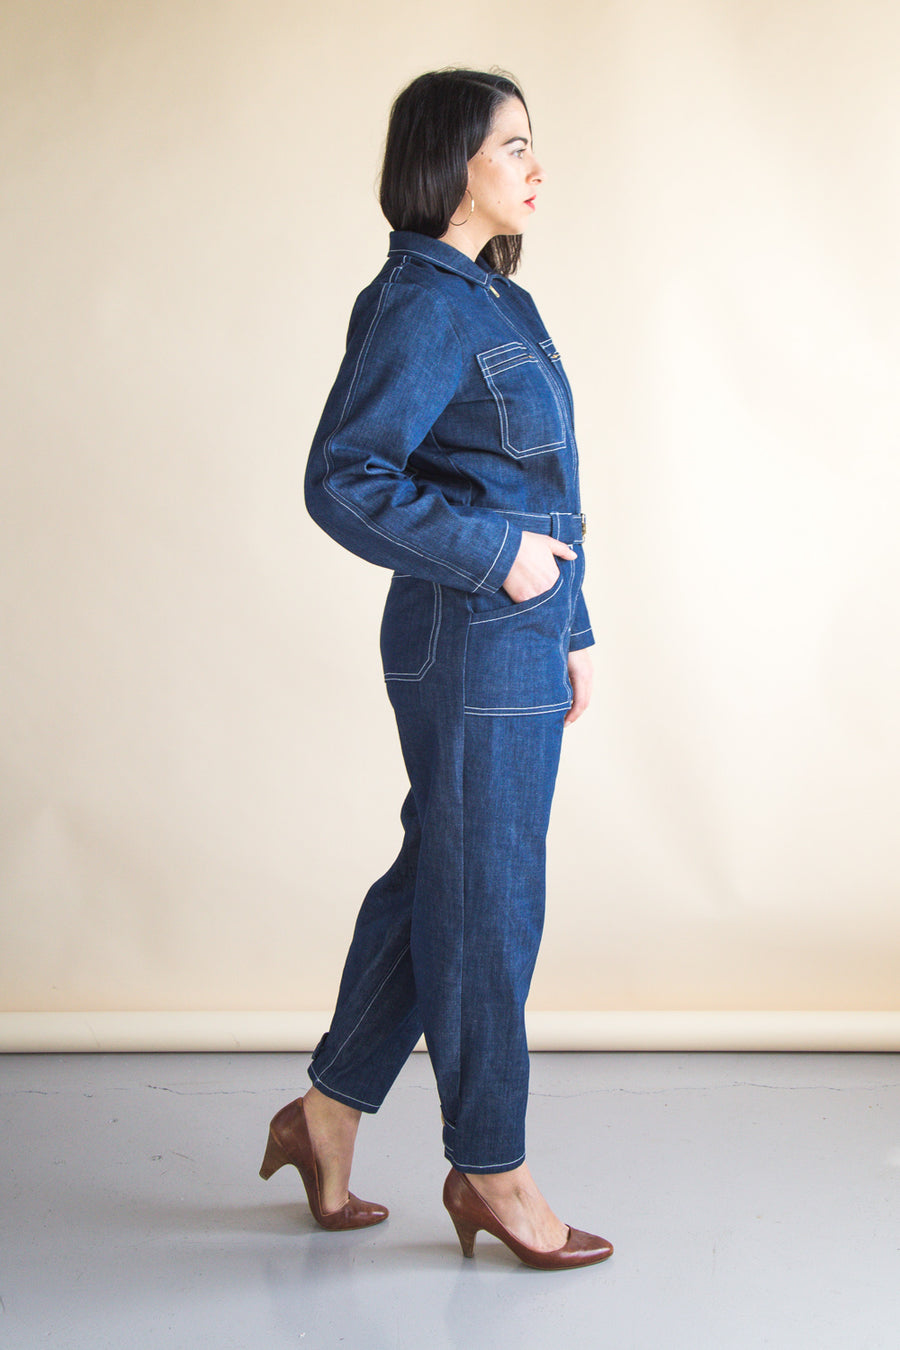 The Mercer flight suit sewing pattern, by Seamwork